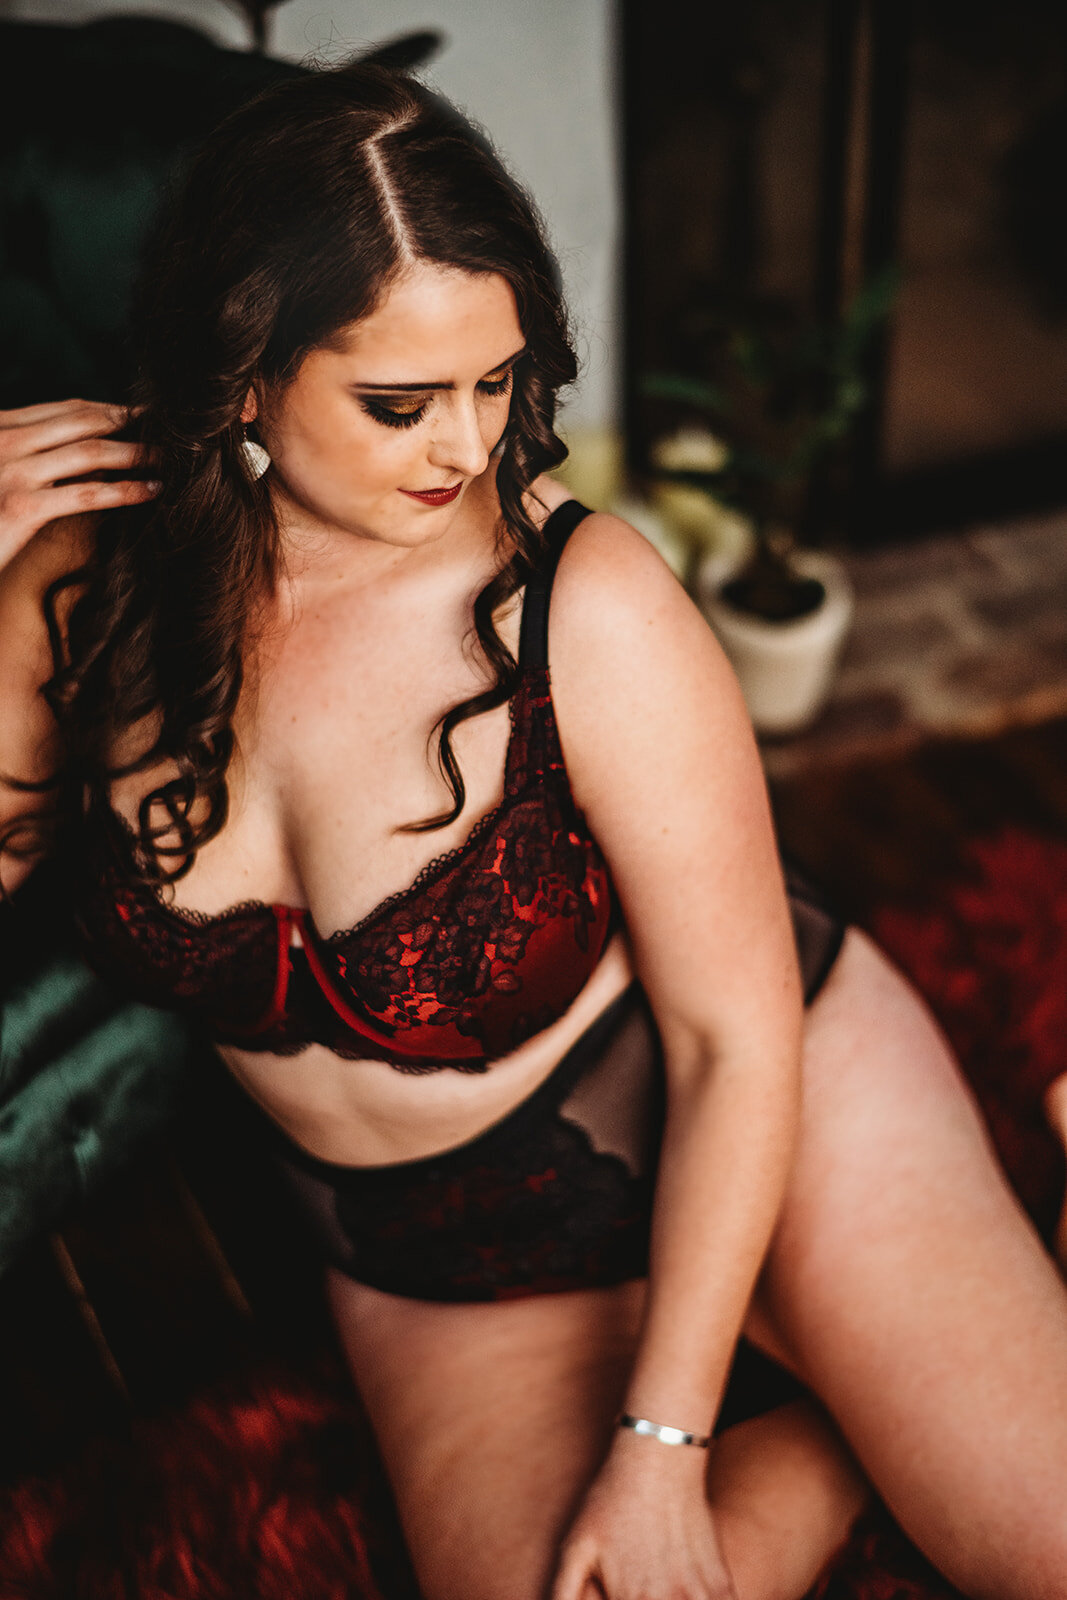 Baltimore photographers  captures in studio boudoir session with woman in a black and red lace pantie and bra set while holding her hair and looking down her shoulder